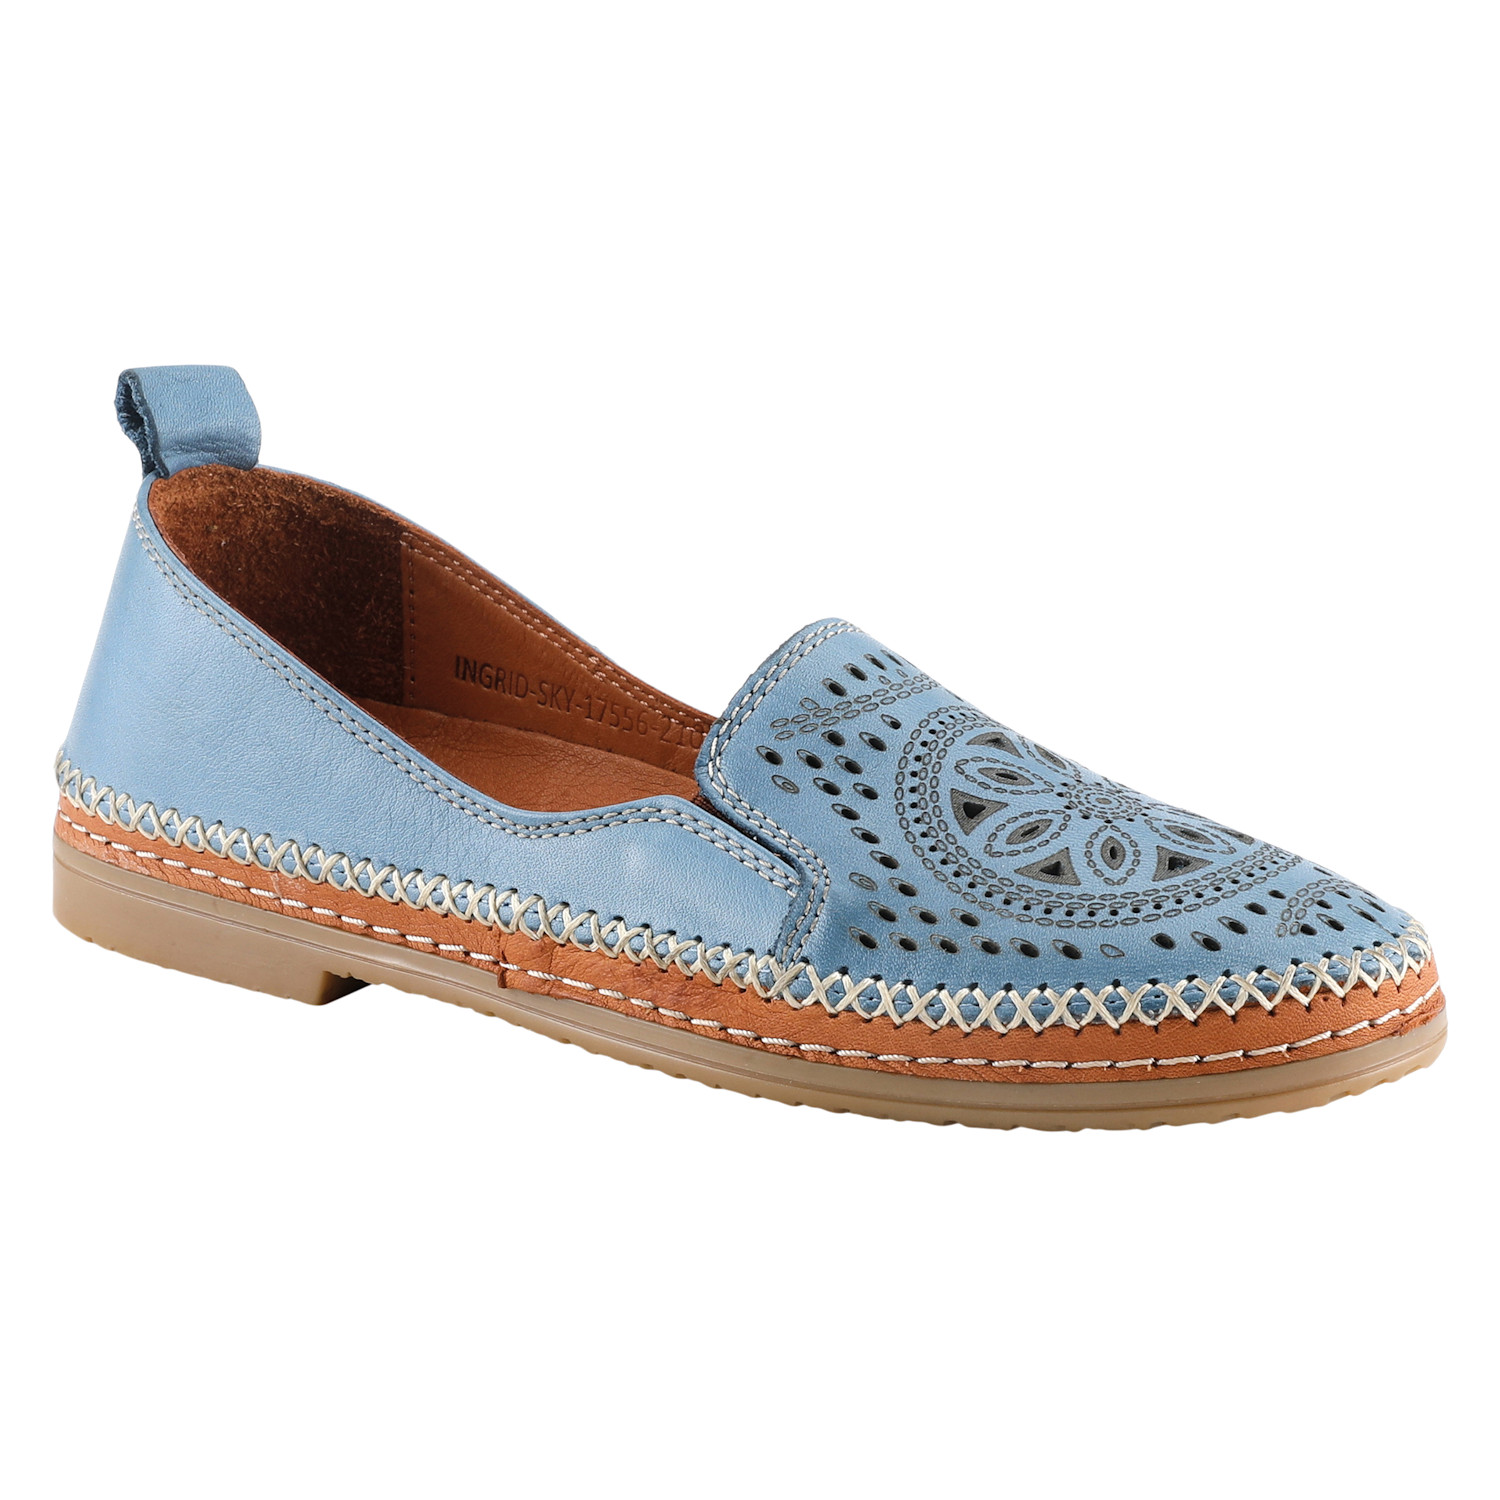 Spring Step Ingrid Loafers | Support Plus